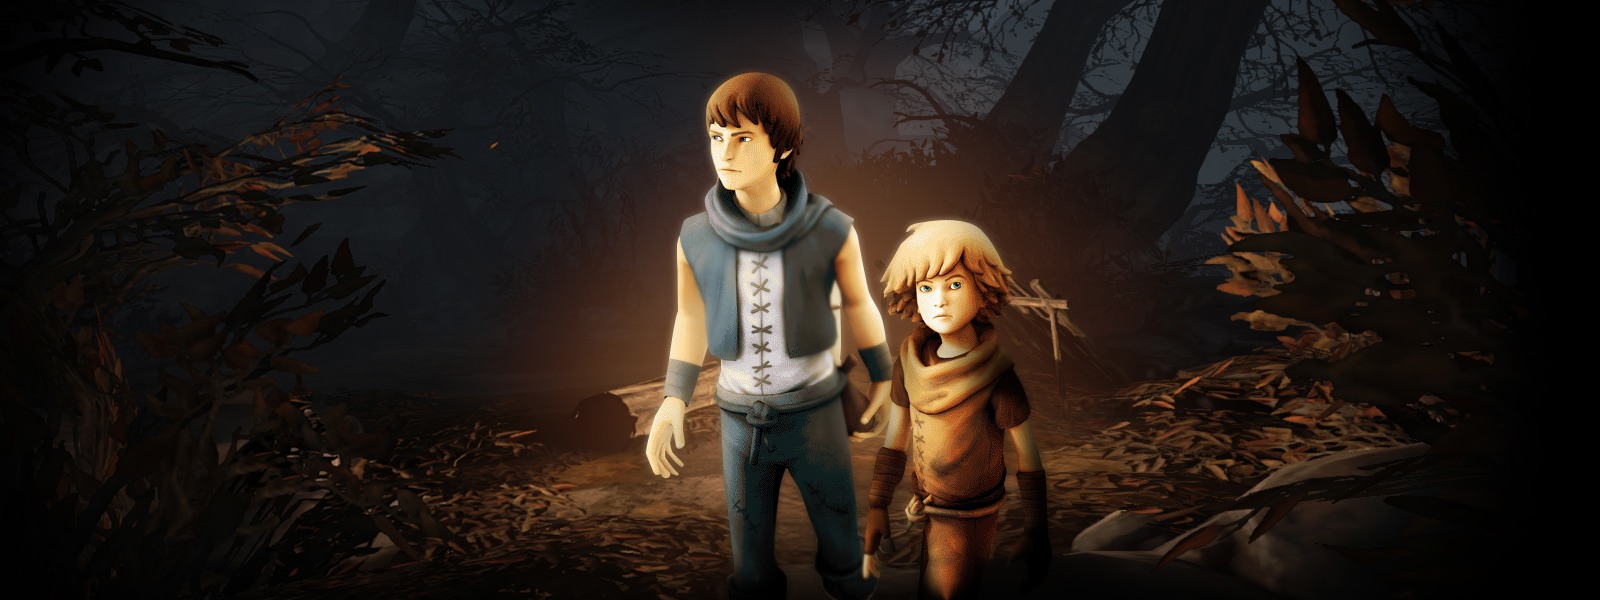 Арт к игре Brothers: A Tale of Two Sons